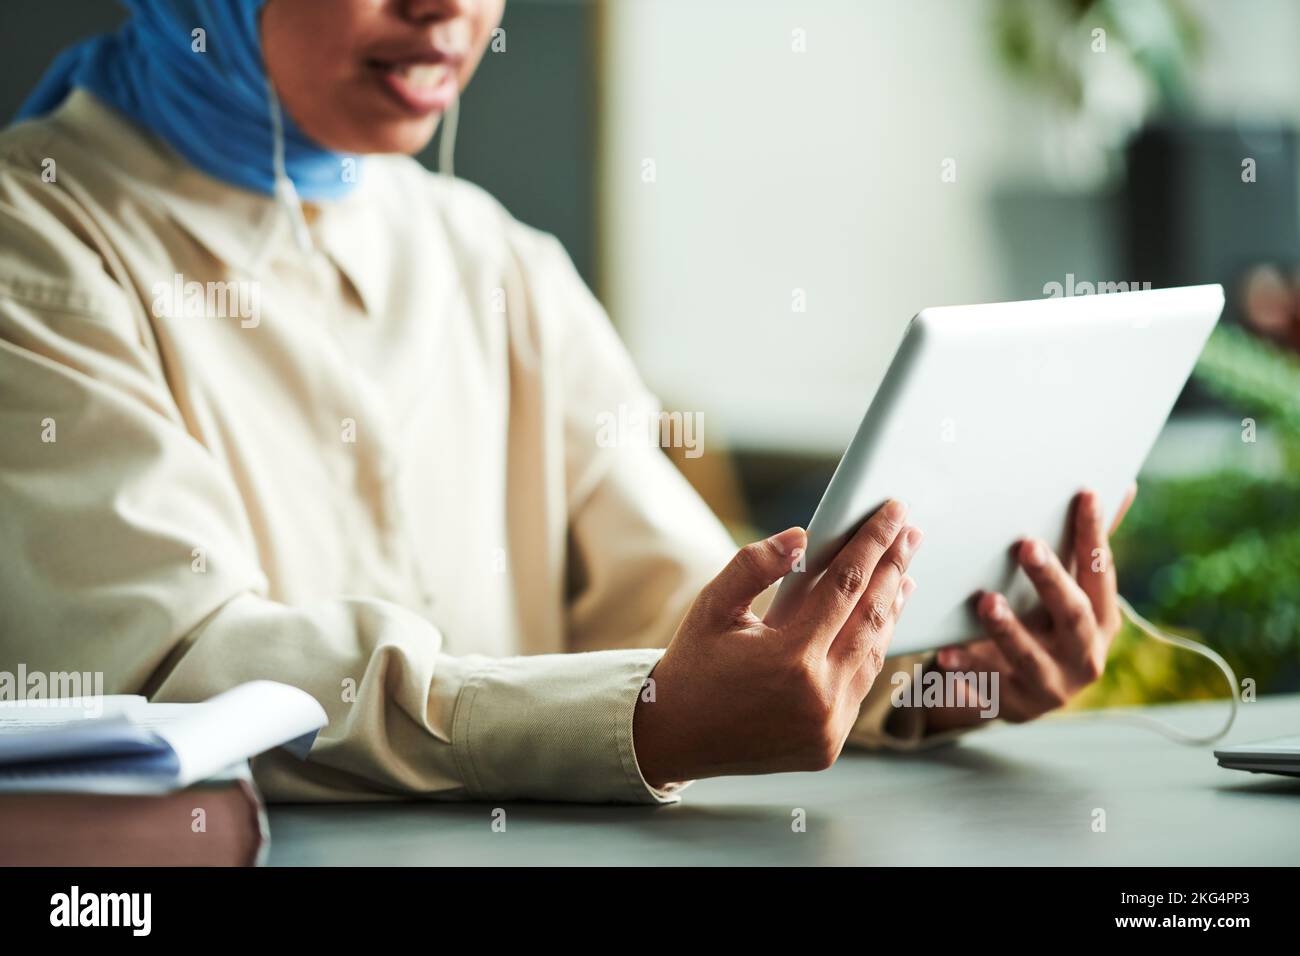 Hands of young Muslim tutor holding tablet in front of herself while communicating with online student or audience during online lesson Stock Photo